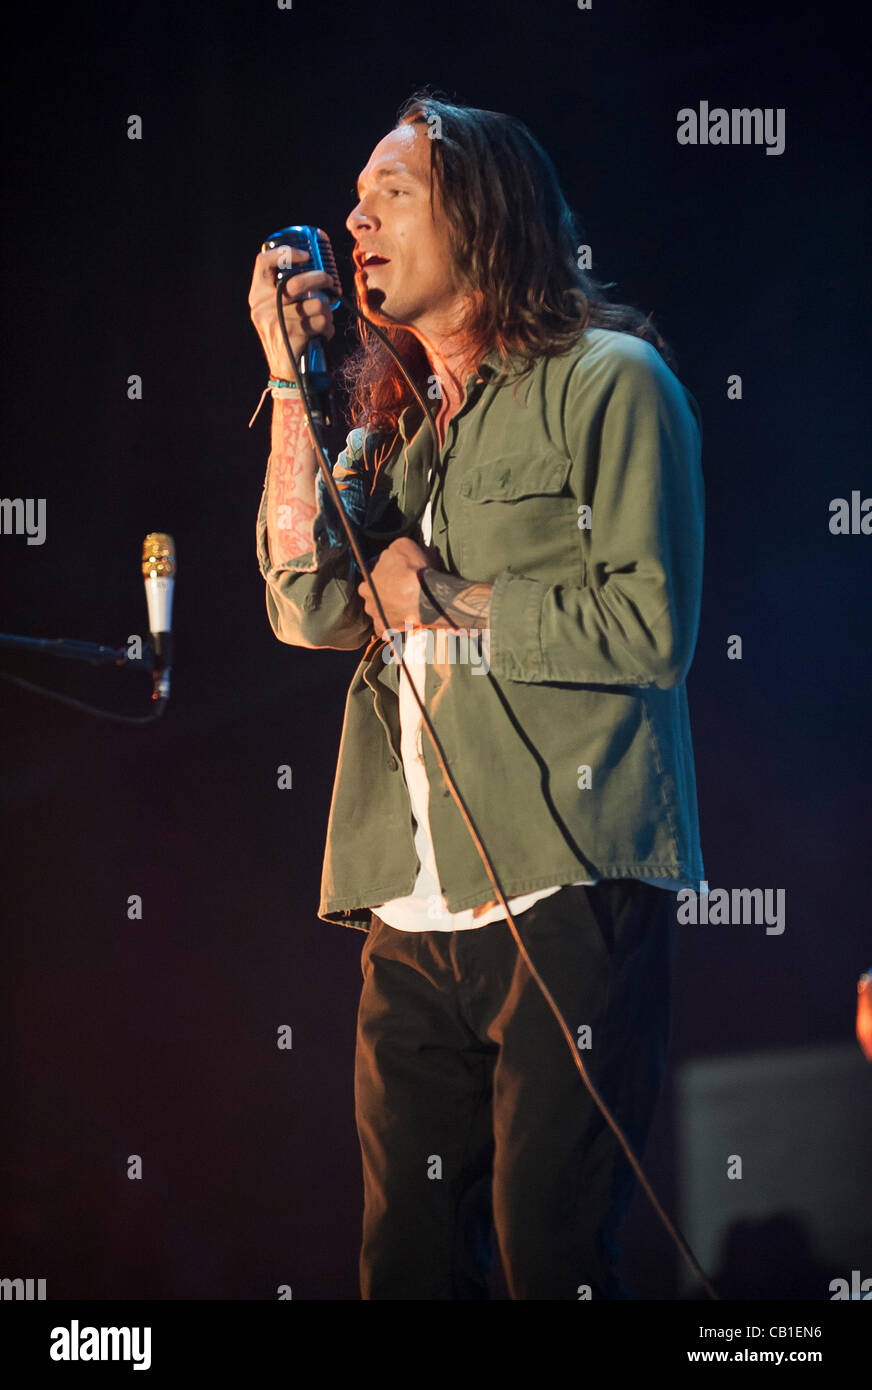 May 19, 2012 - Columbus, Ohio; USA -  Singer BRANDON BOYD of the band Incubus performs live as part of the 6th Annual Rock on the Range Music Festival that is taking place at the Crew Stadium located in Columbus. Copyright 2012 Jason Moore. (Credit Image: © Jason Moore/ZUMAPRESS.com) Stock Photo